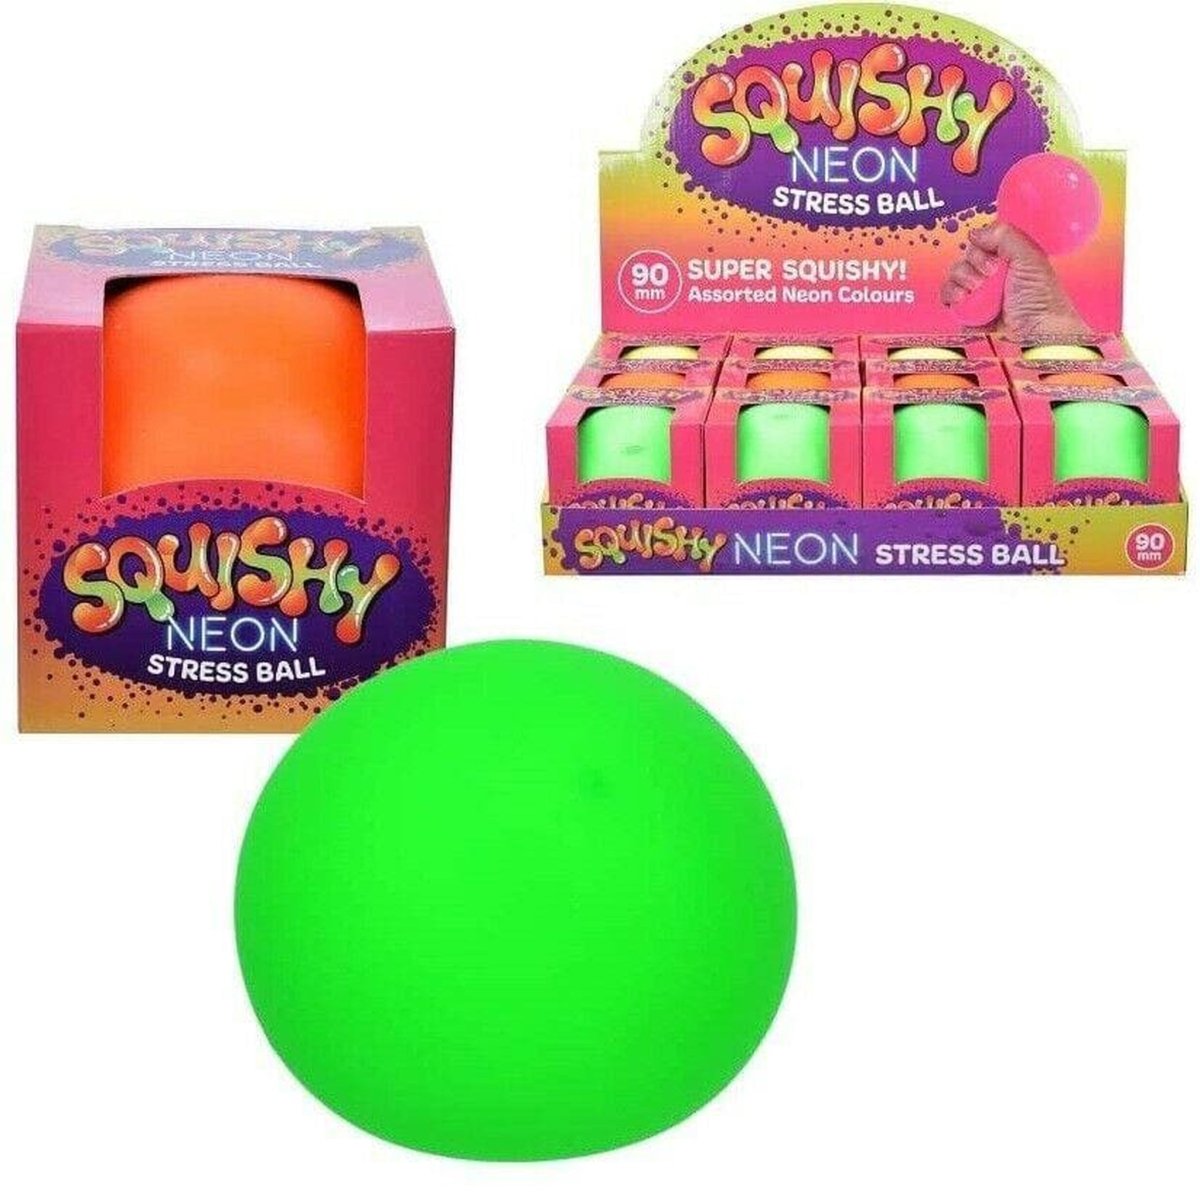 Squishy Neon Stress Reliever Ball Toy - Kids Party Craft